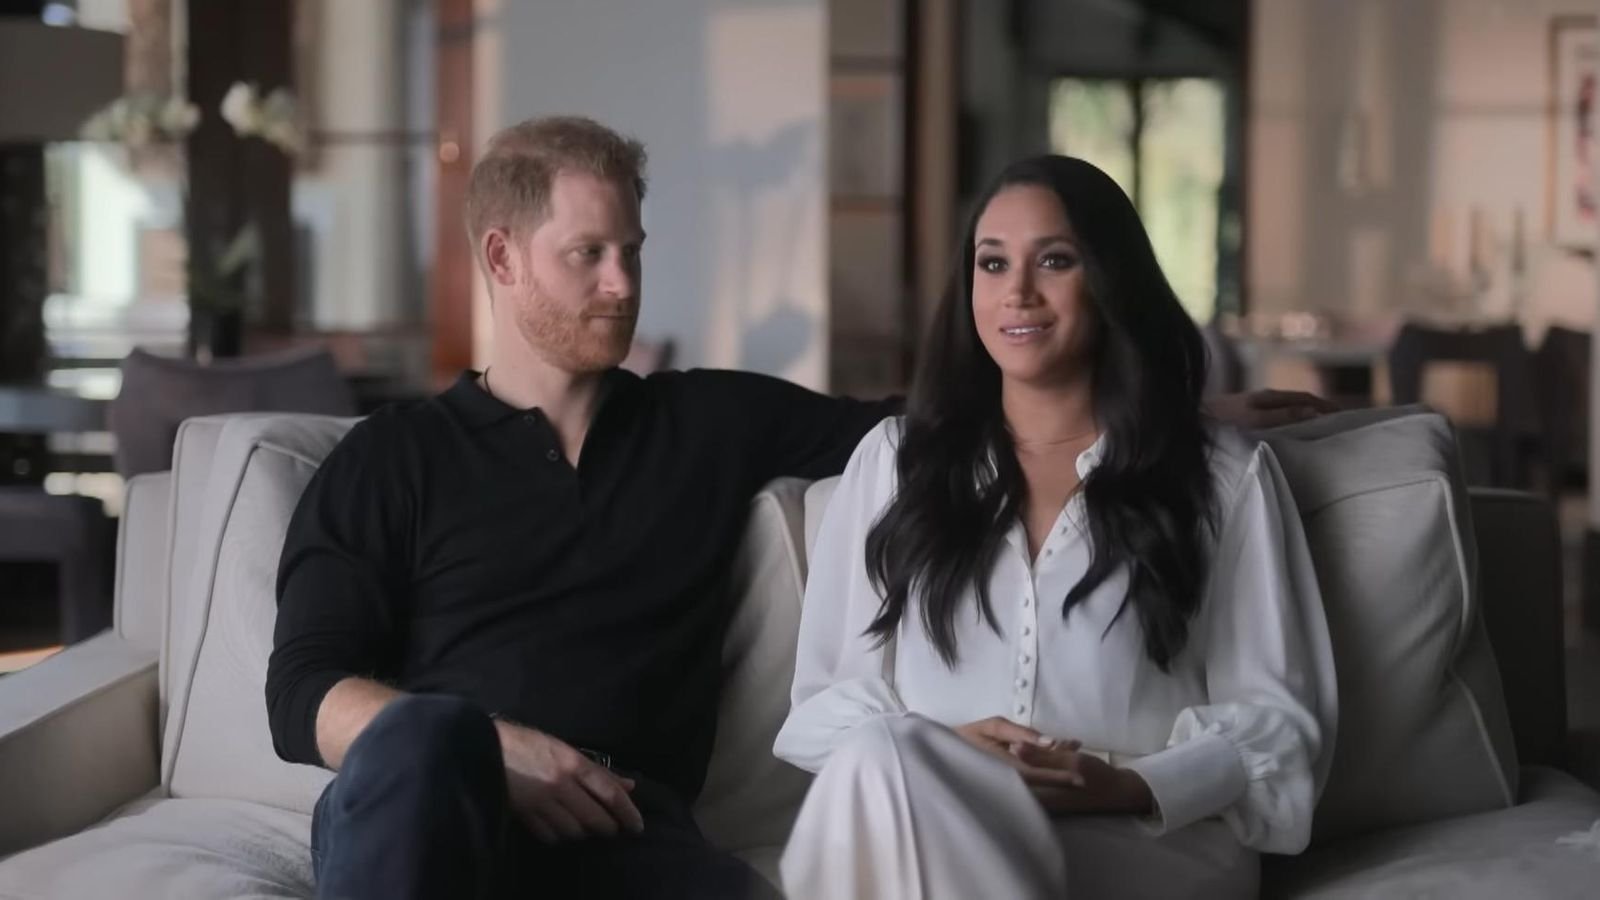 Prince Harry describes 'feeding frenzy' surrounding his relationship with Meghan in Netflix documentary series